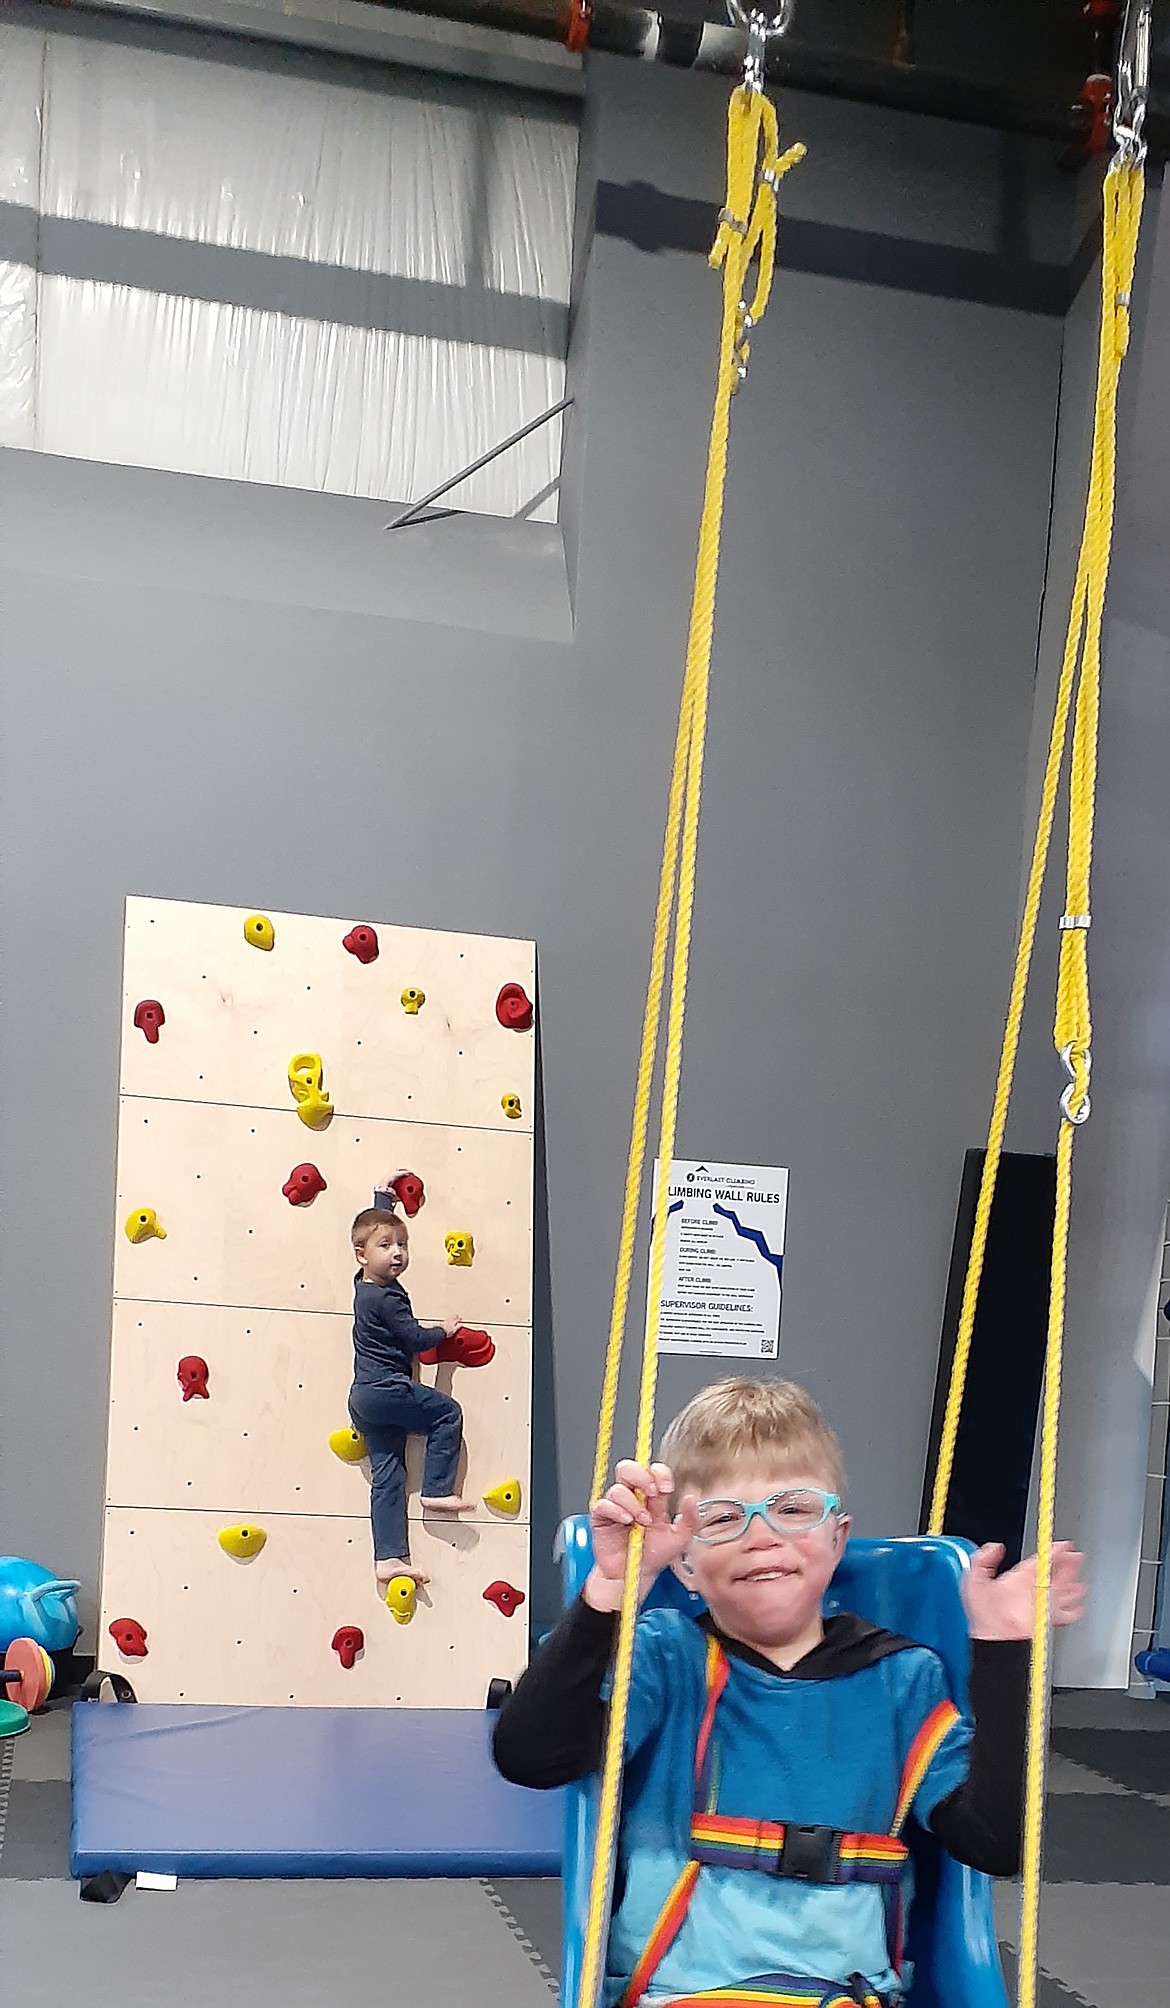 Caleb Bult, pictured in the front, and his brother, Owen, pictured on climbing wall have fun at UCAN (Unique Center for Athletes of All Needs).